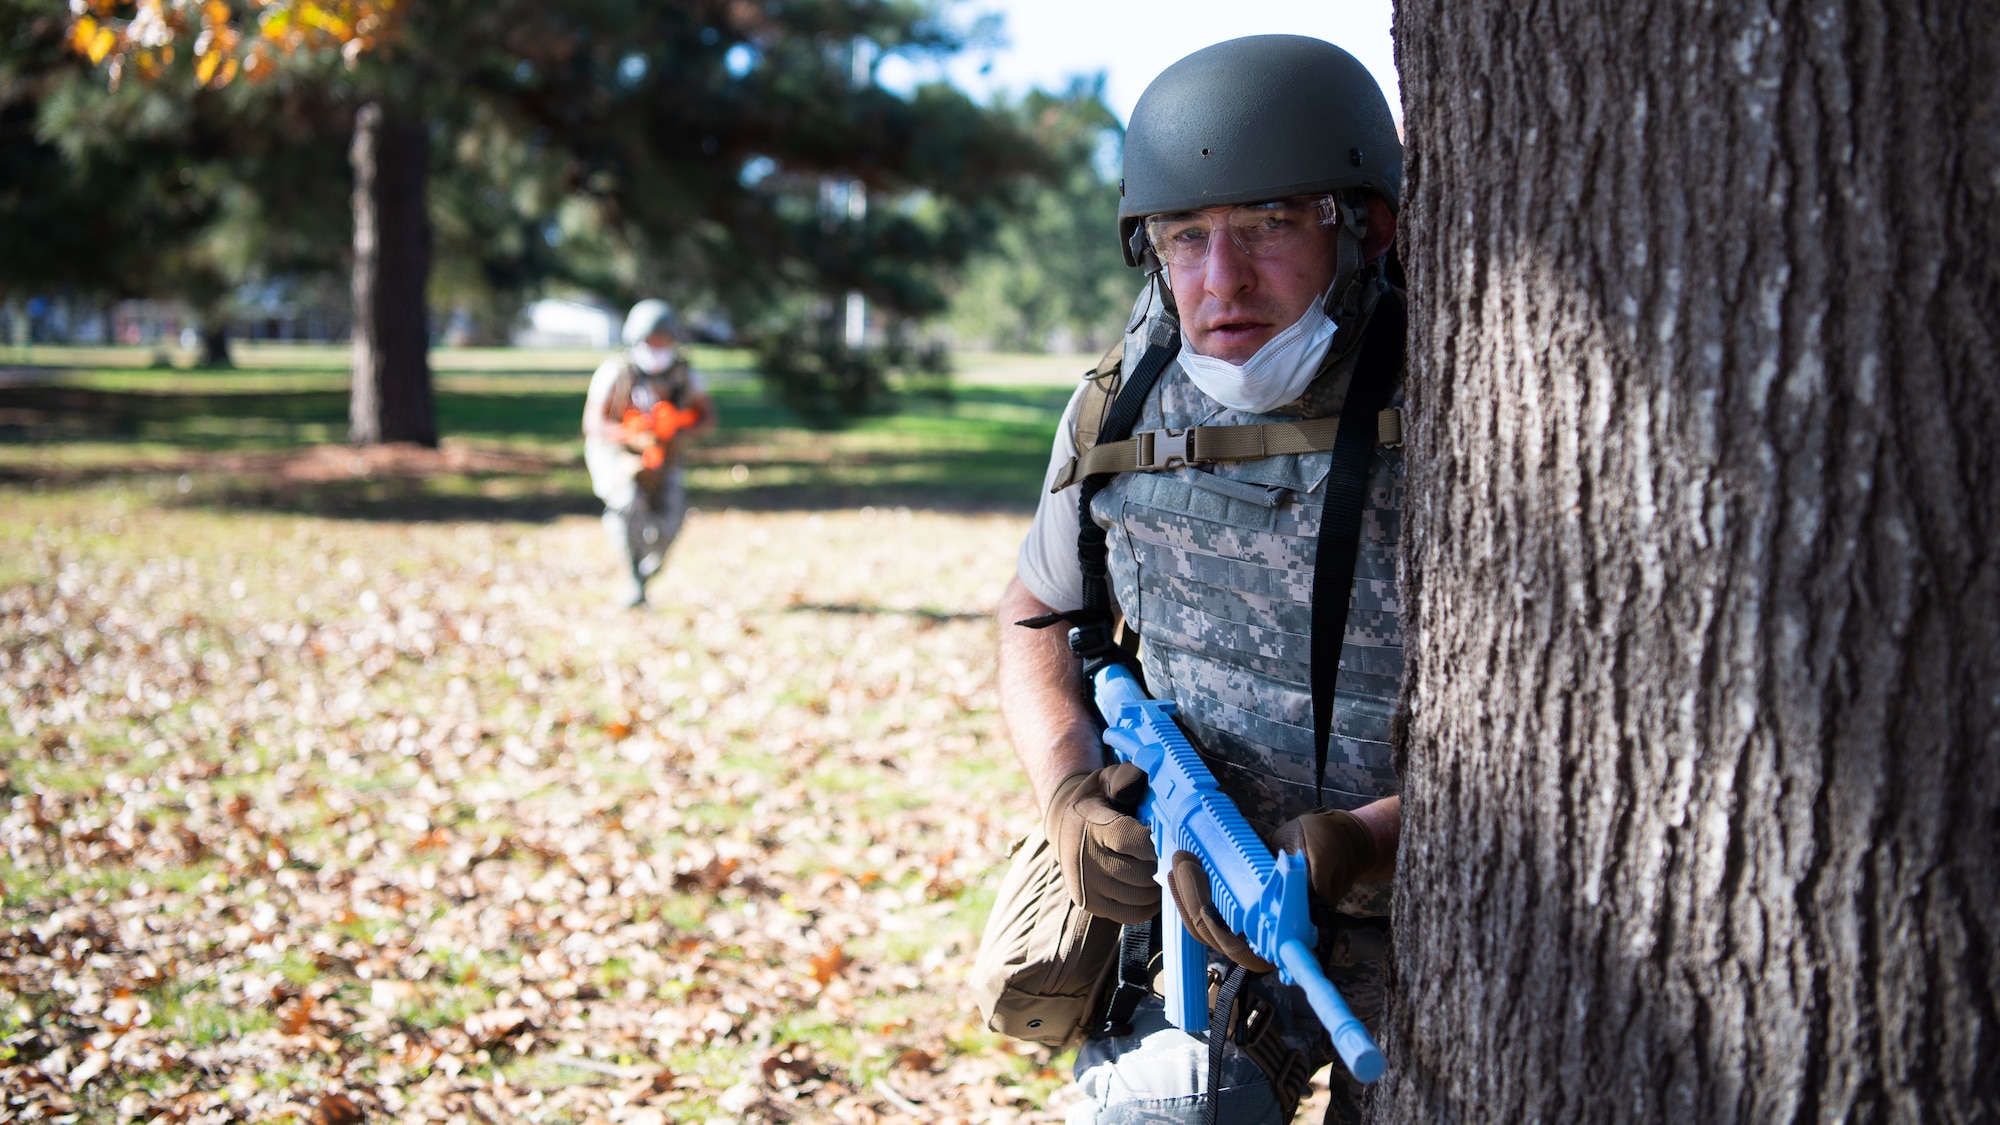 Tech. Sgt. Michael Tomaszewski, Operational Medical Readiness Squadron medical technician, positions himself behind a tree during a Tactical Combat Casualty Care (TCCC) field training exercise at Barksdale Air Force Base, La., Dec. 9, 2020.